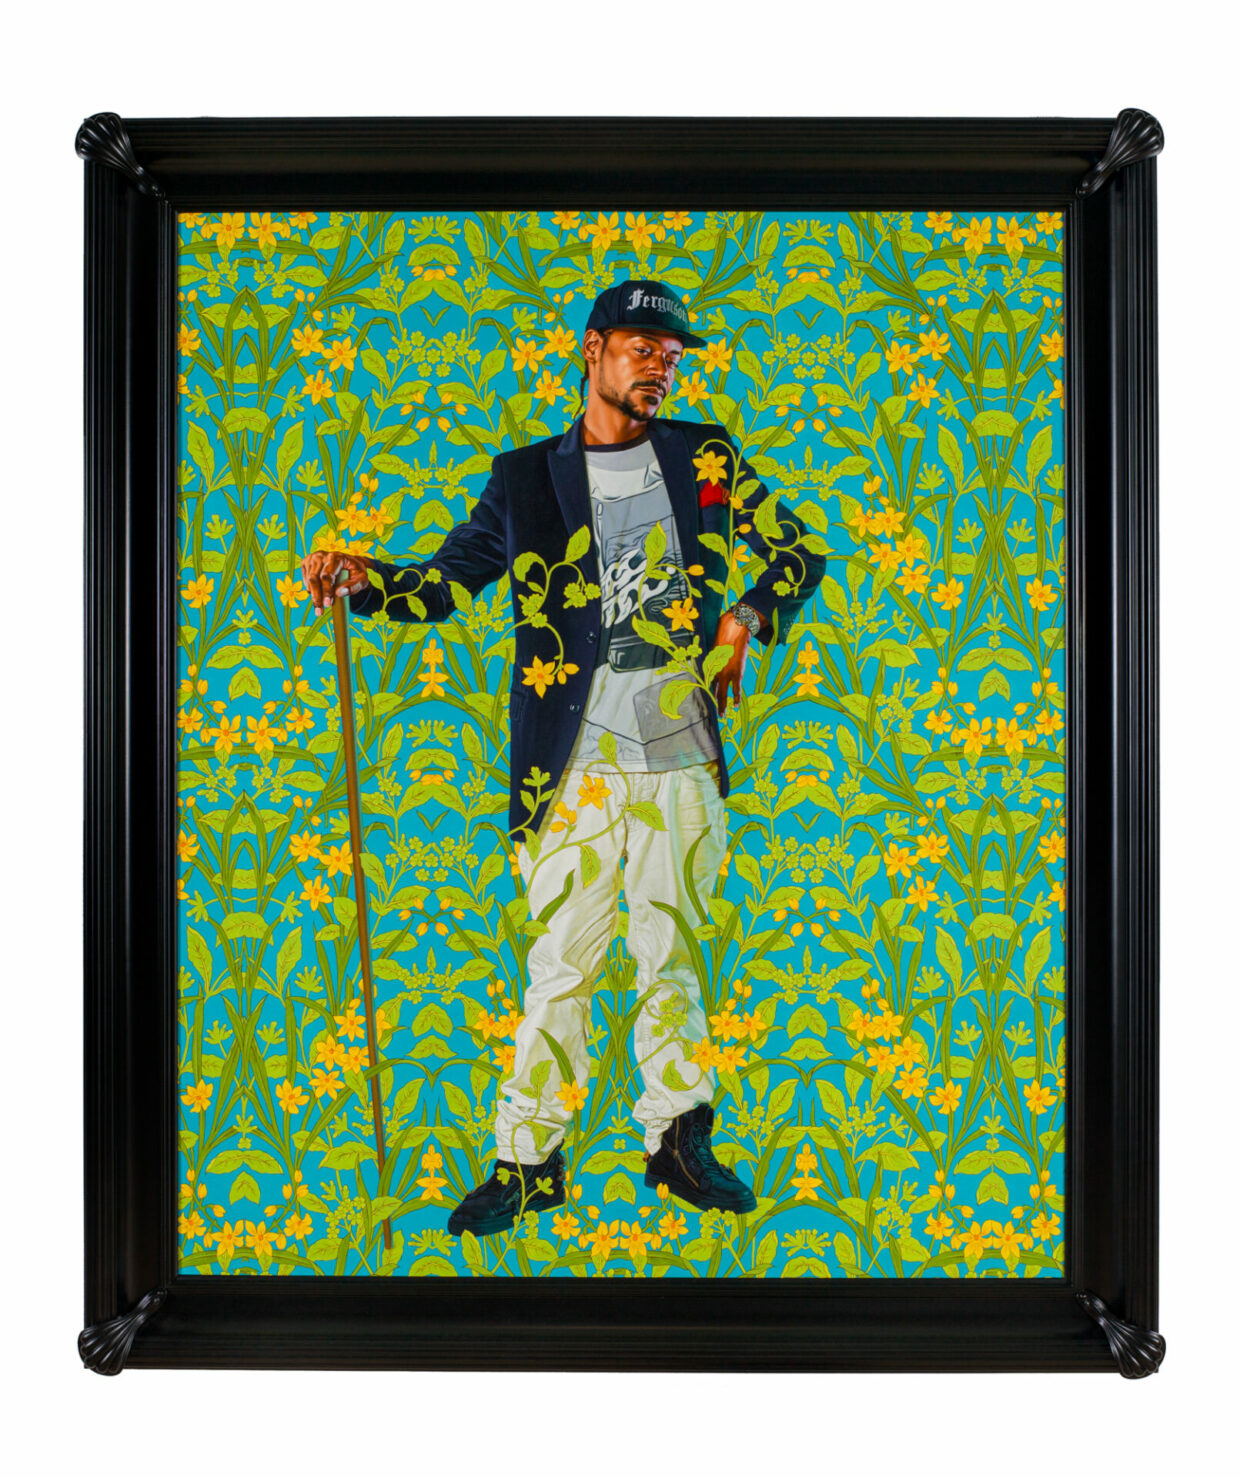 Kehinde Wiley: ‘When I first started painting black women, it was a return home’ | 7